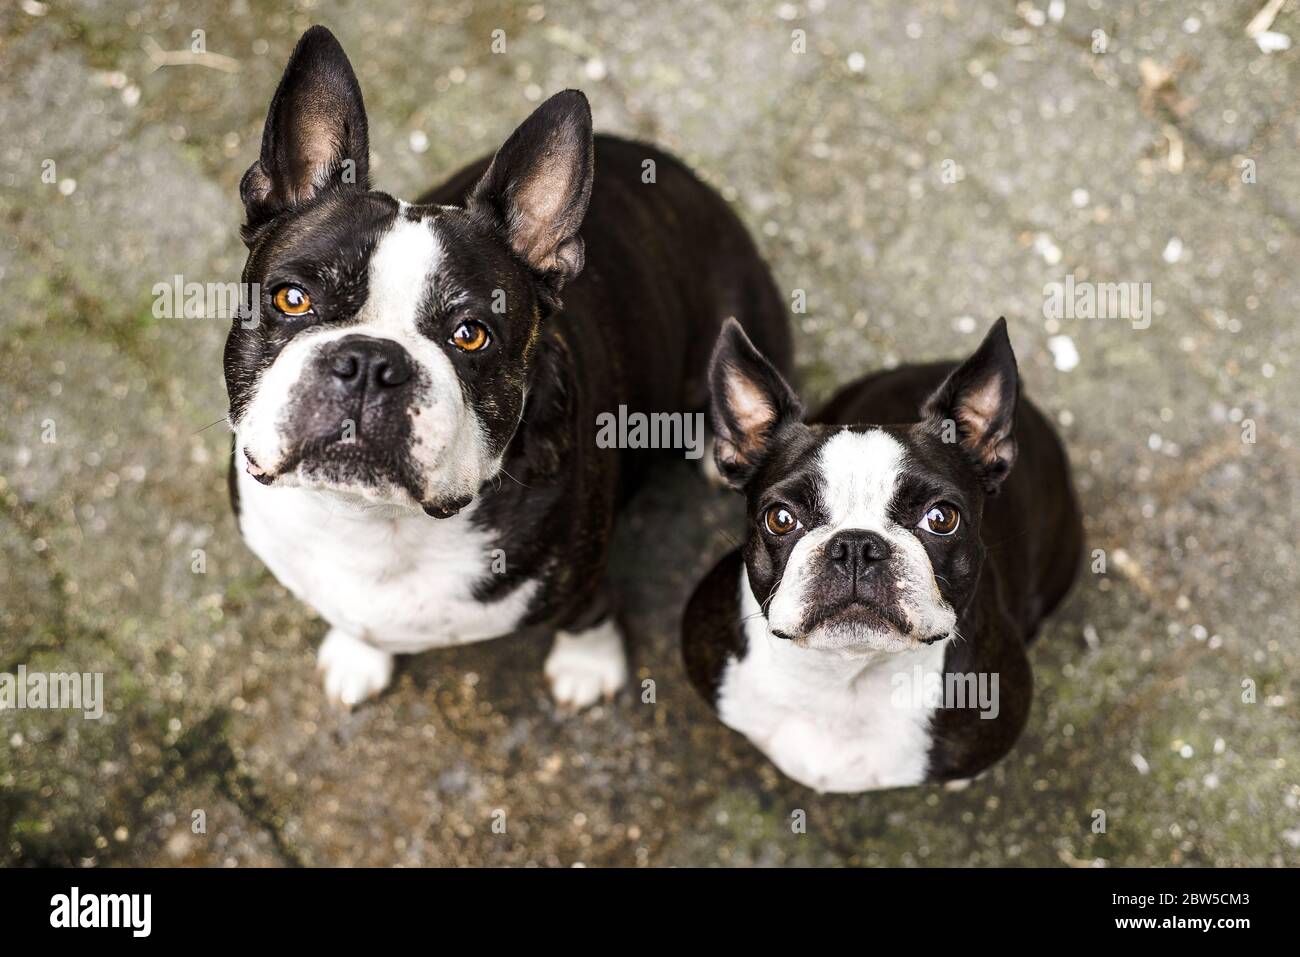 Two Boston Terrier dogs looking up at the camera Stock Photo